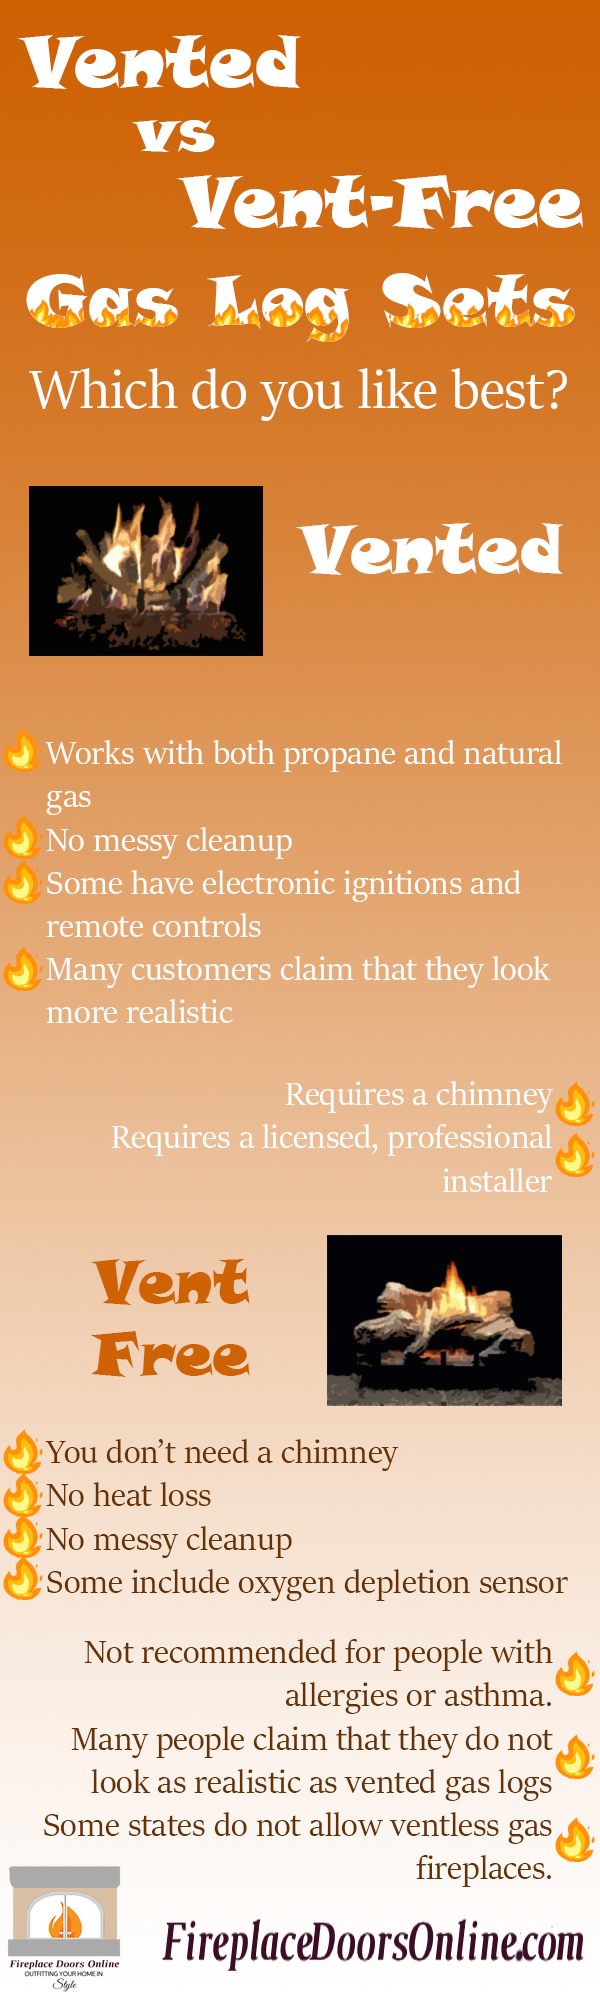 Gas Logs The Log Experts, Compare Vented And Ventless Gas Fireplaces